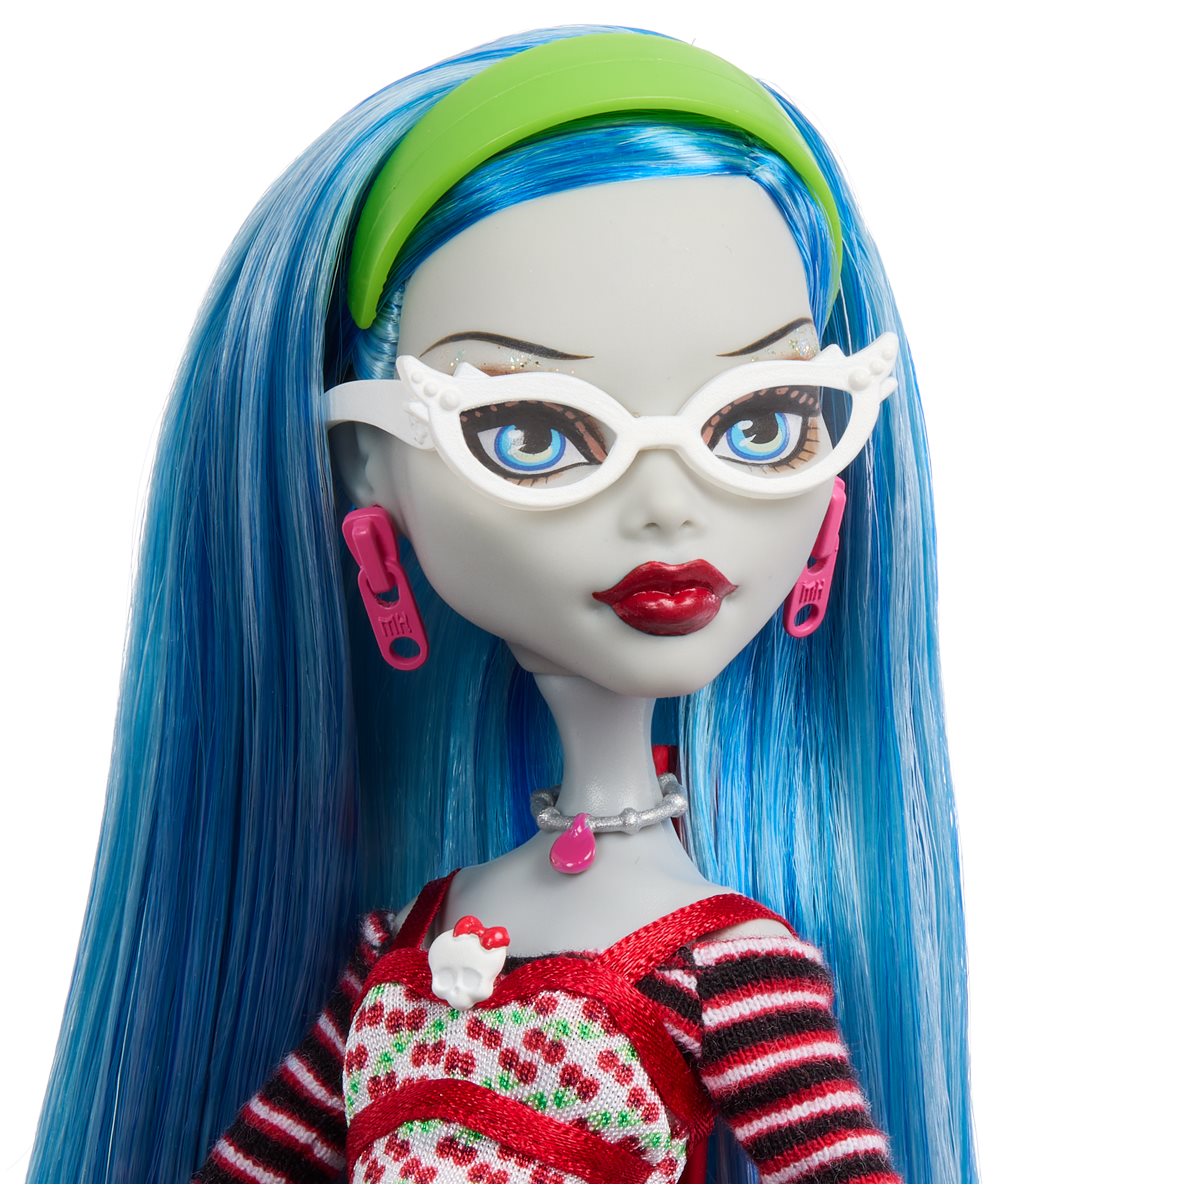 Booriginal Creeproduction Ghoulia Collectible Doll